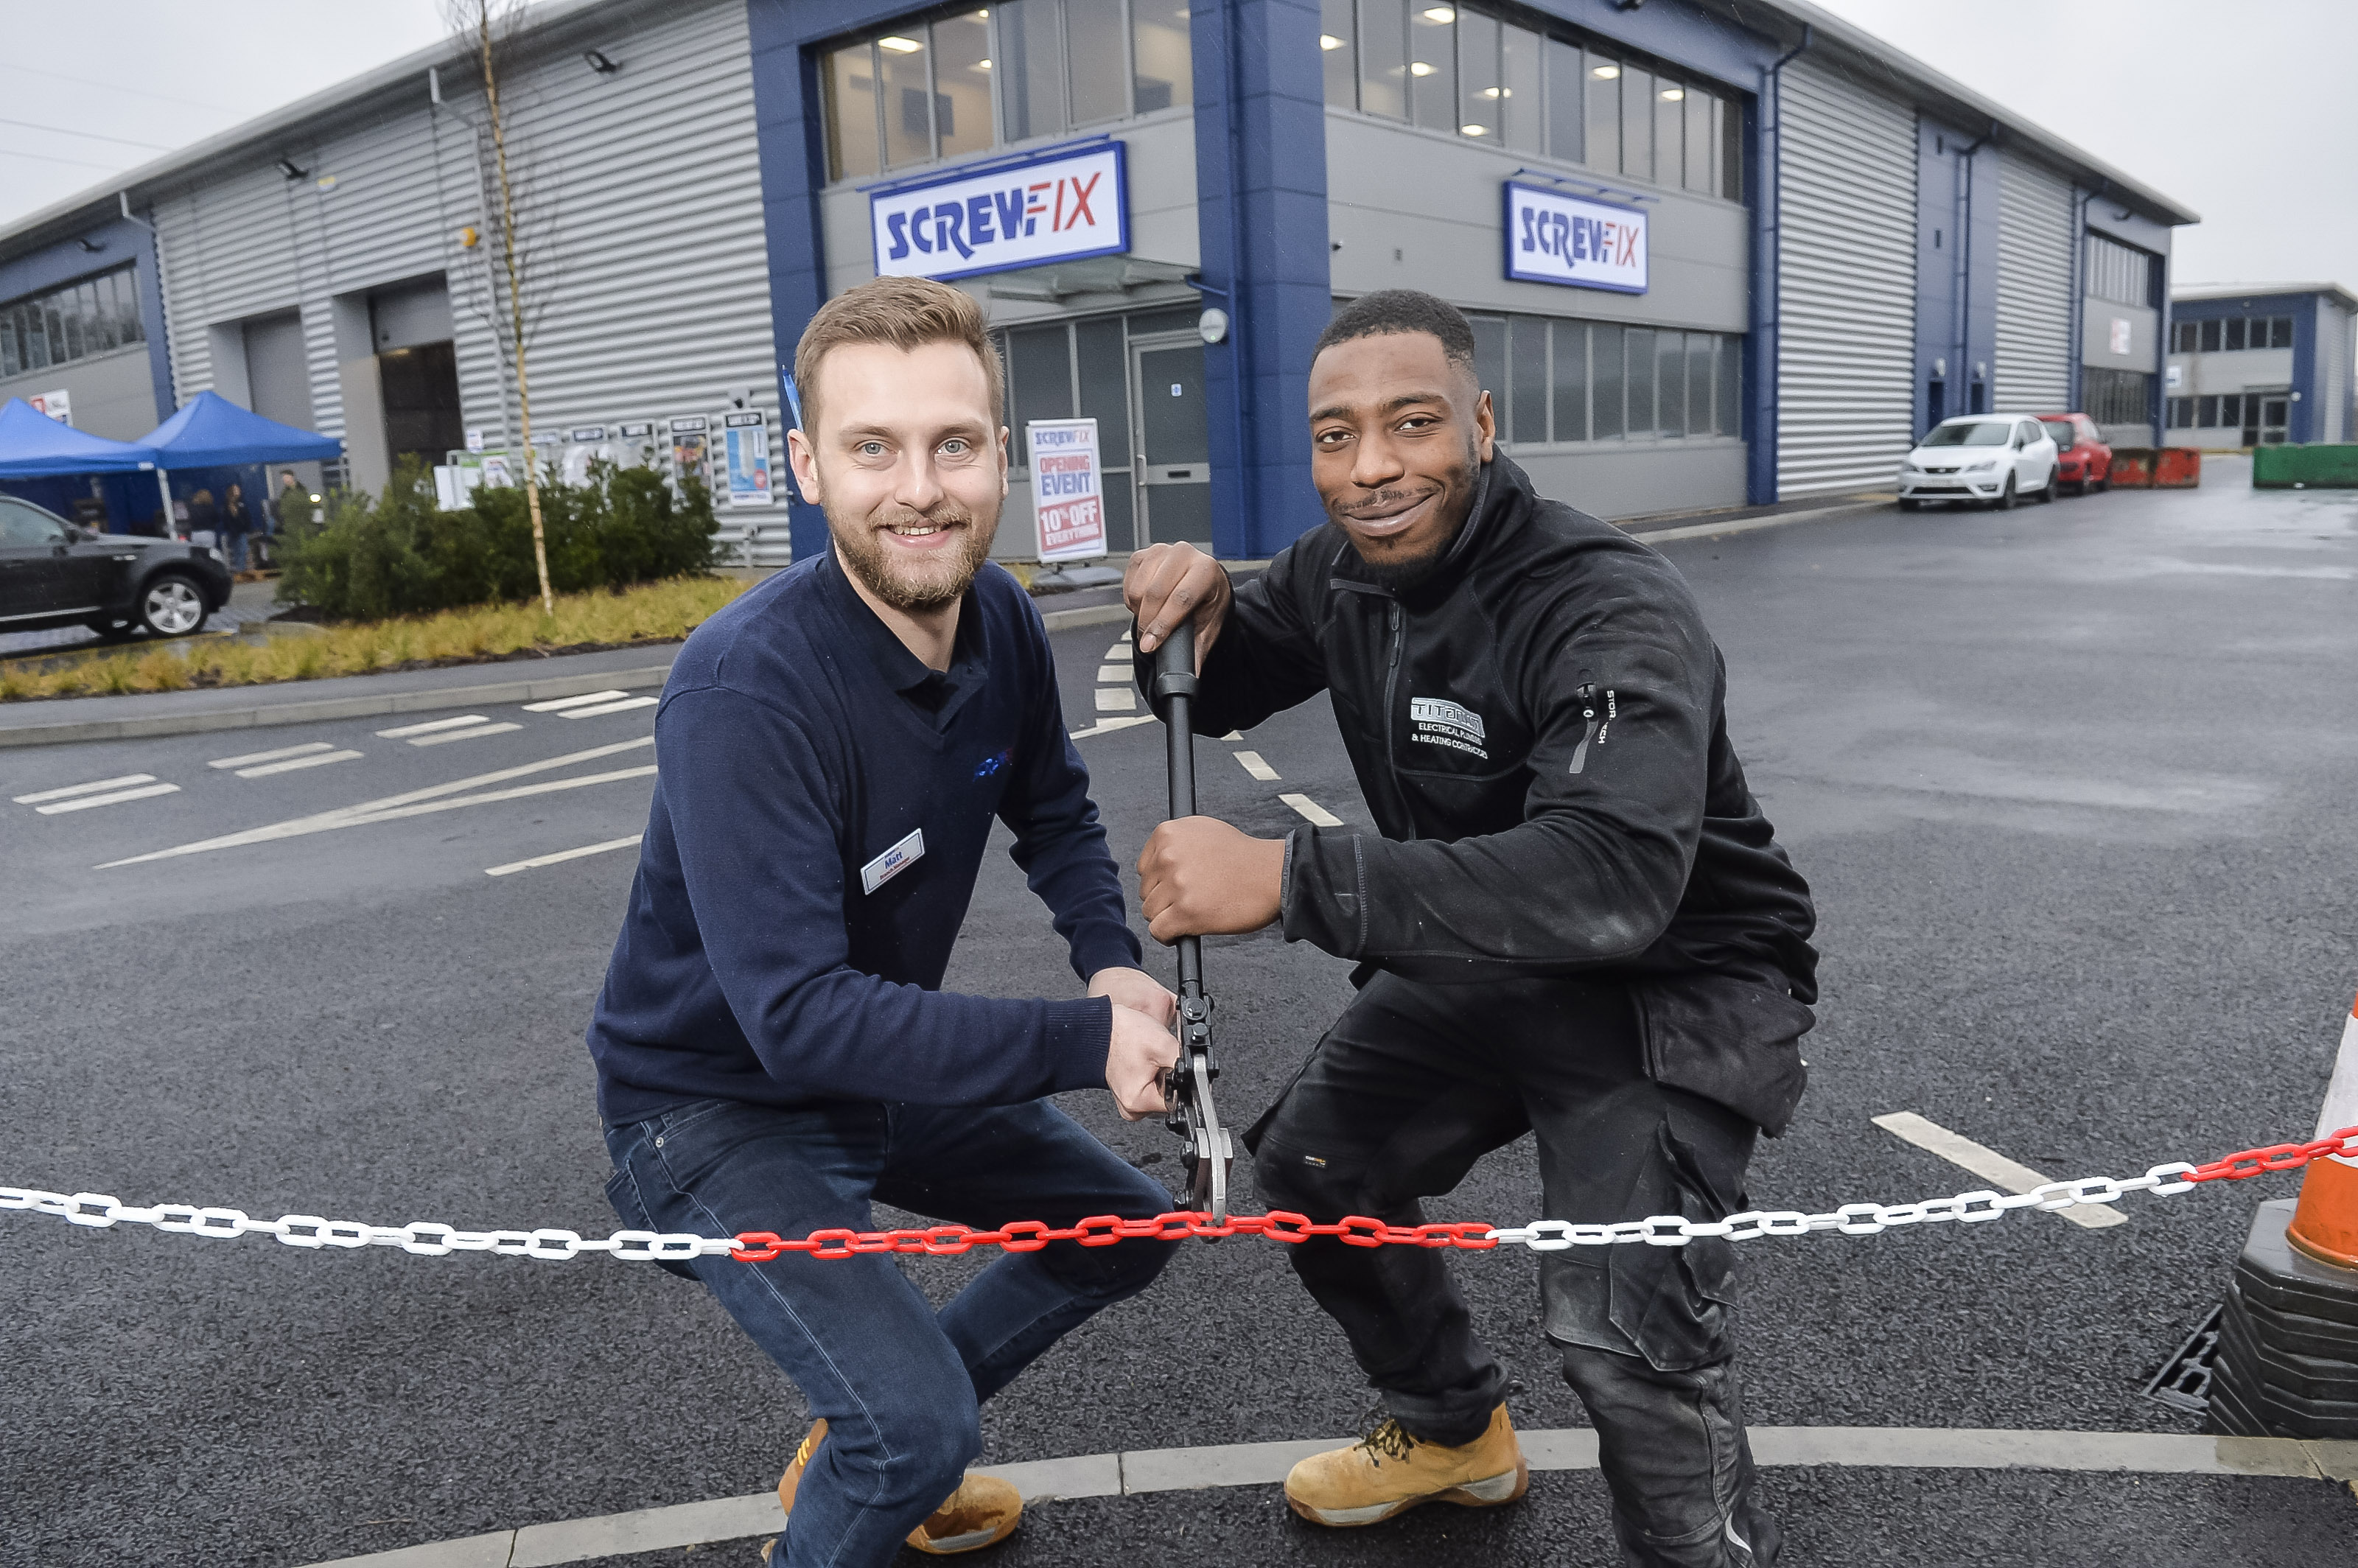 Watford’s second Screwfix store is declared a runaway success